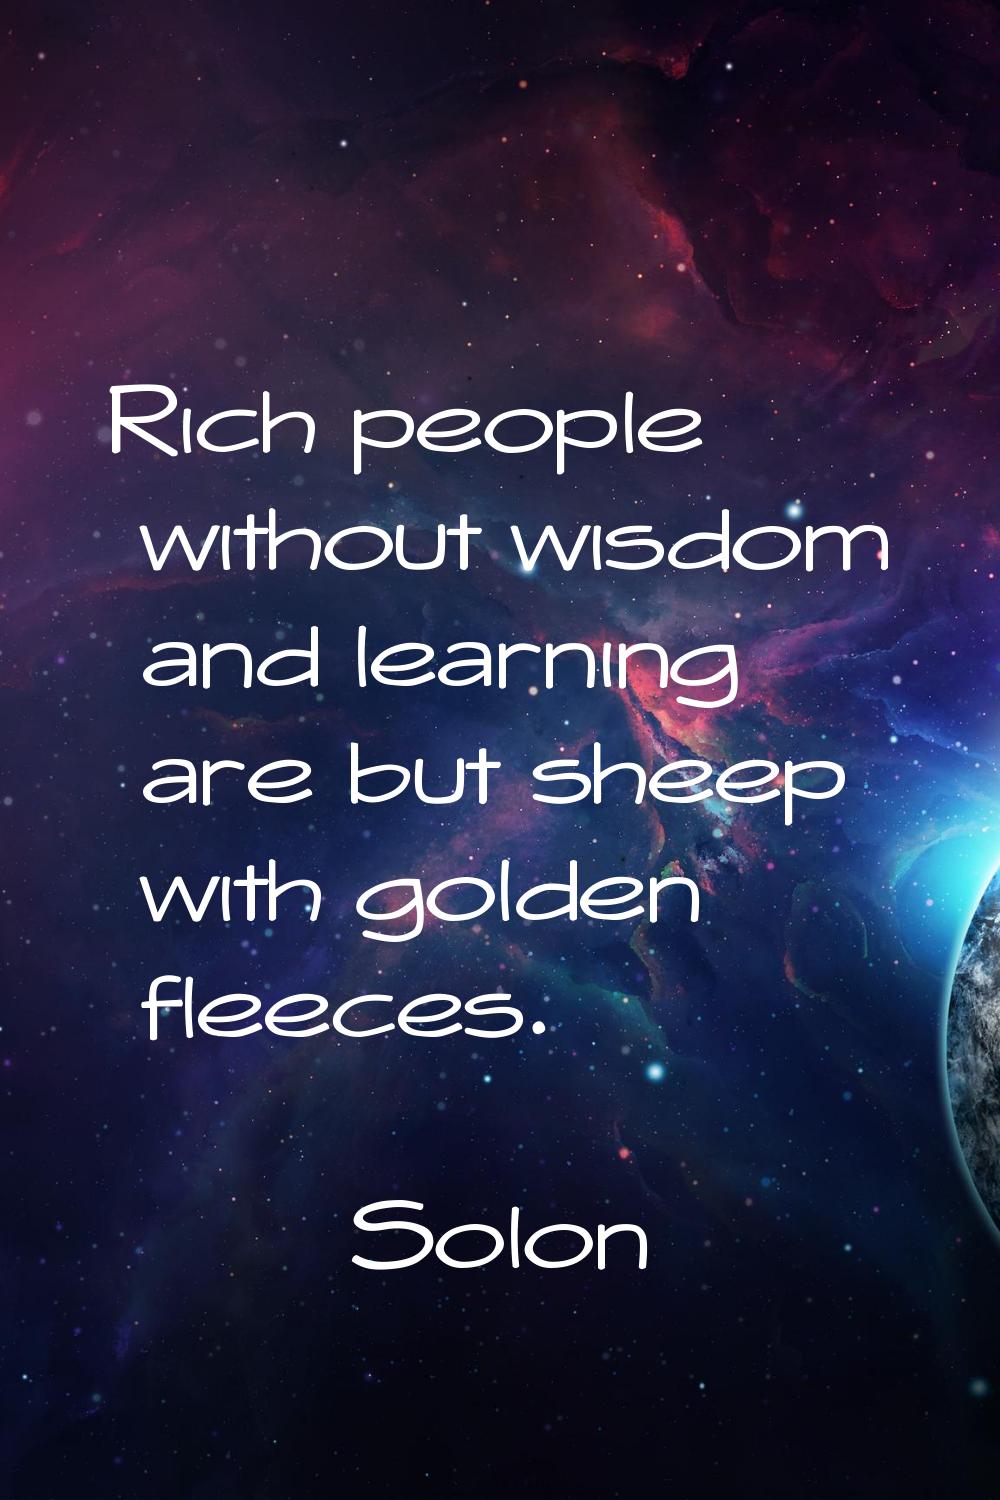 Rich people without wisdom and learning are but sheep with golden fleeces.